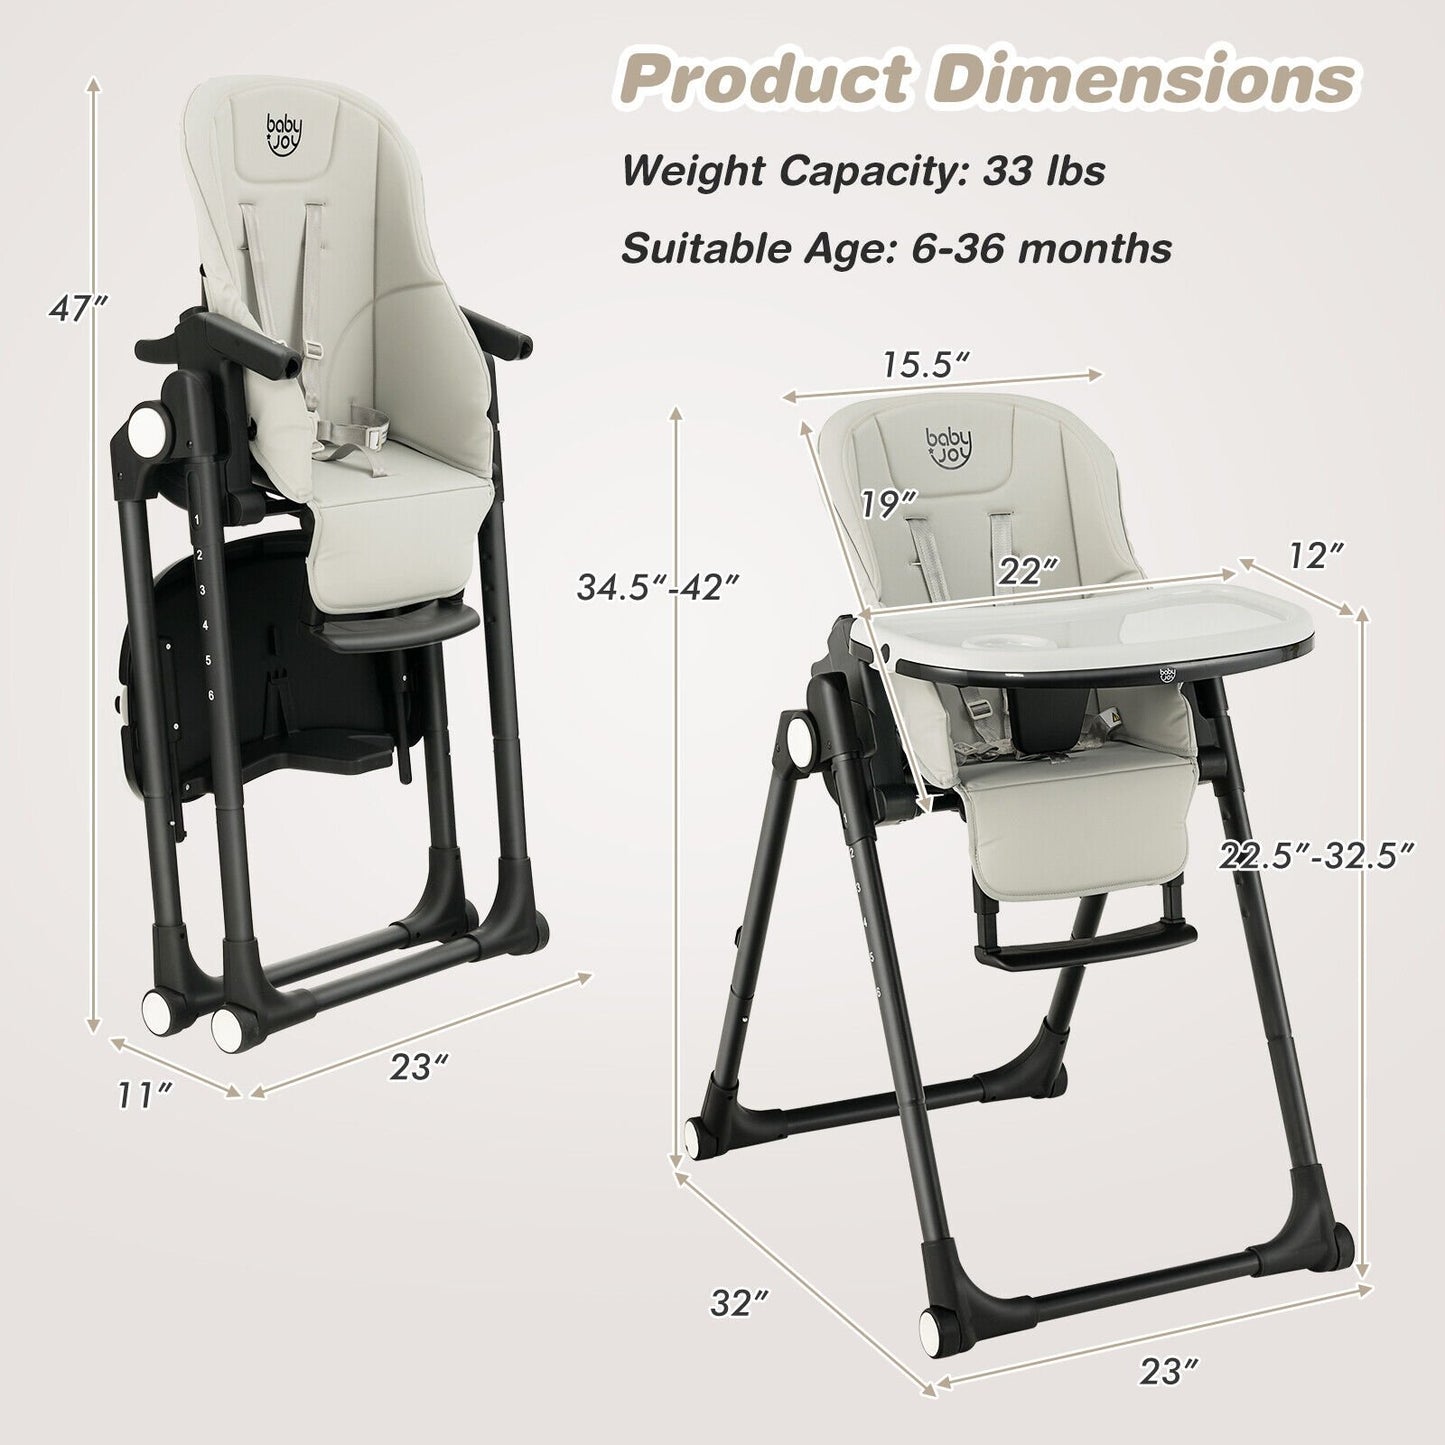 4-in-1 Baby High Chair with 6 Adjustable Heights, Gray - Gallery Canada